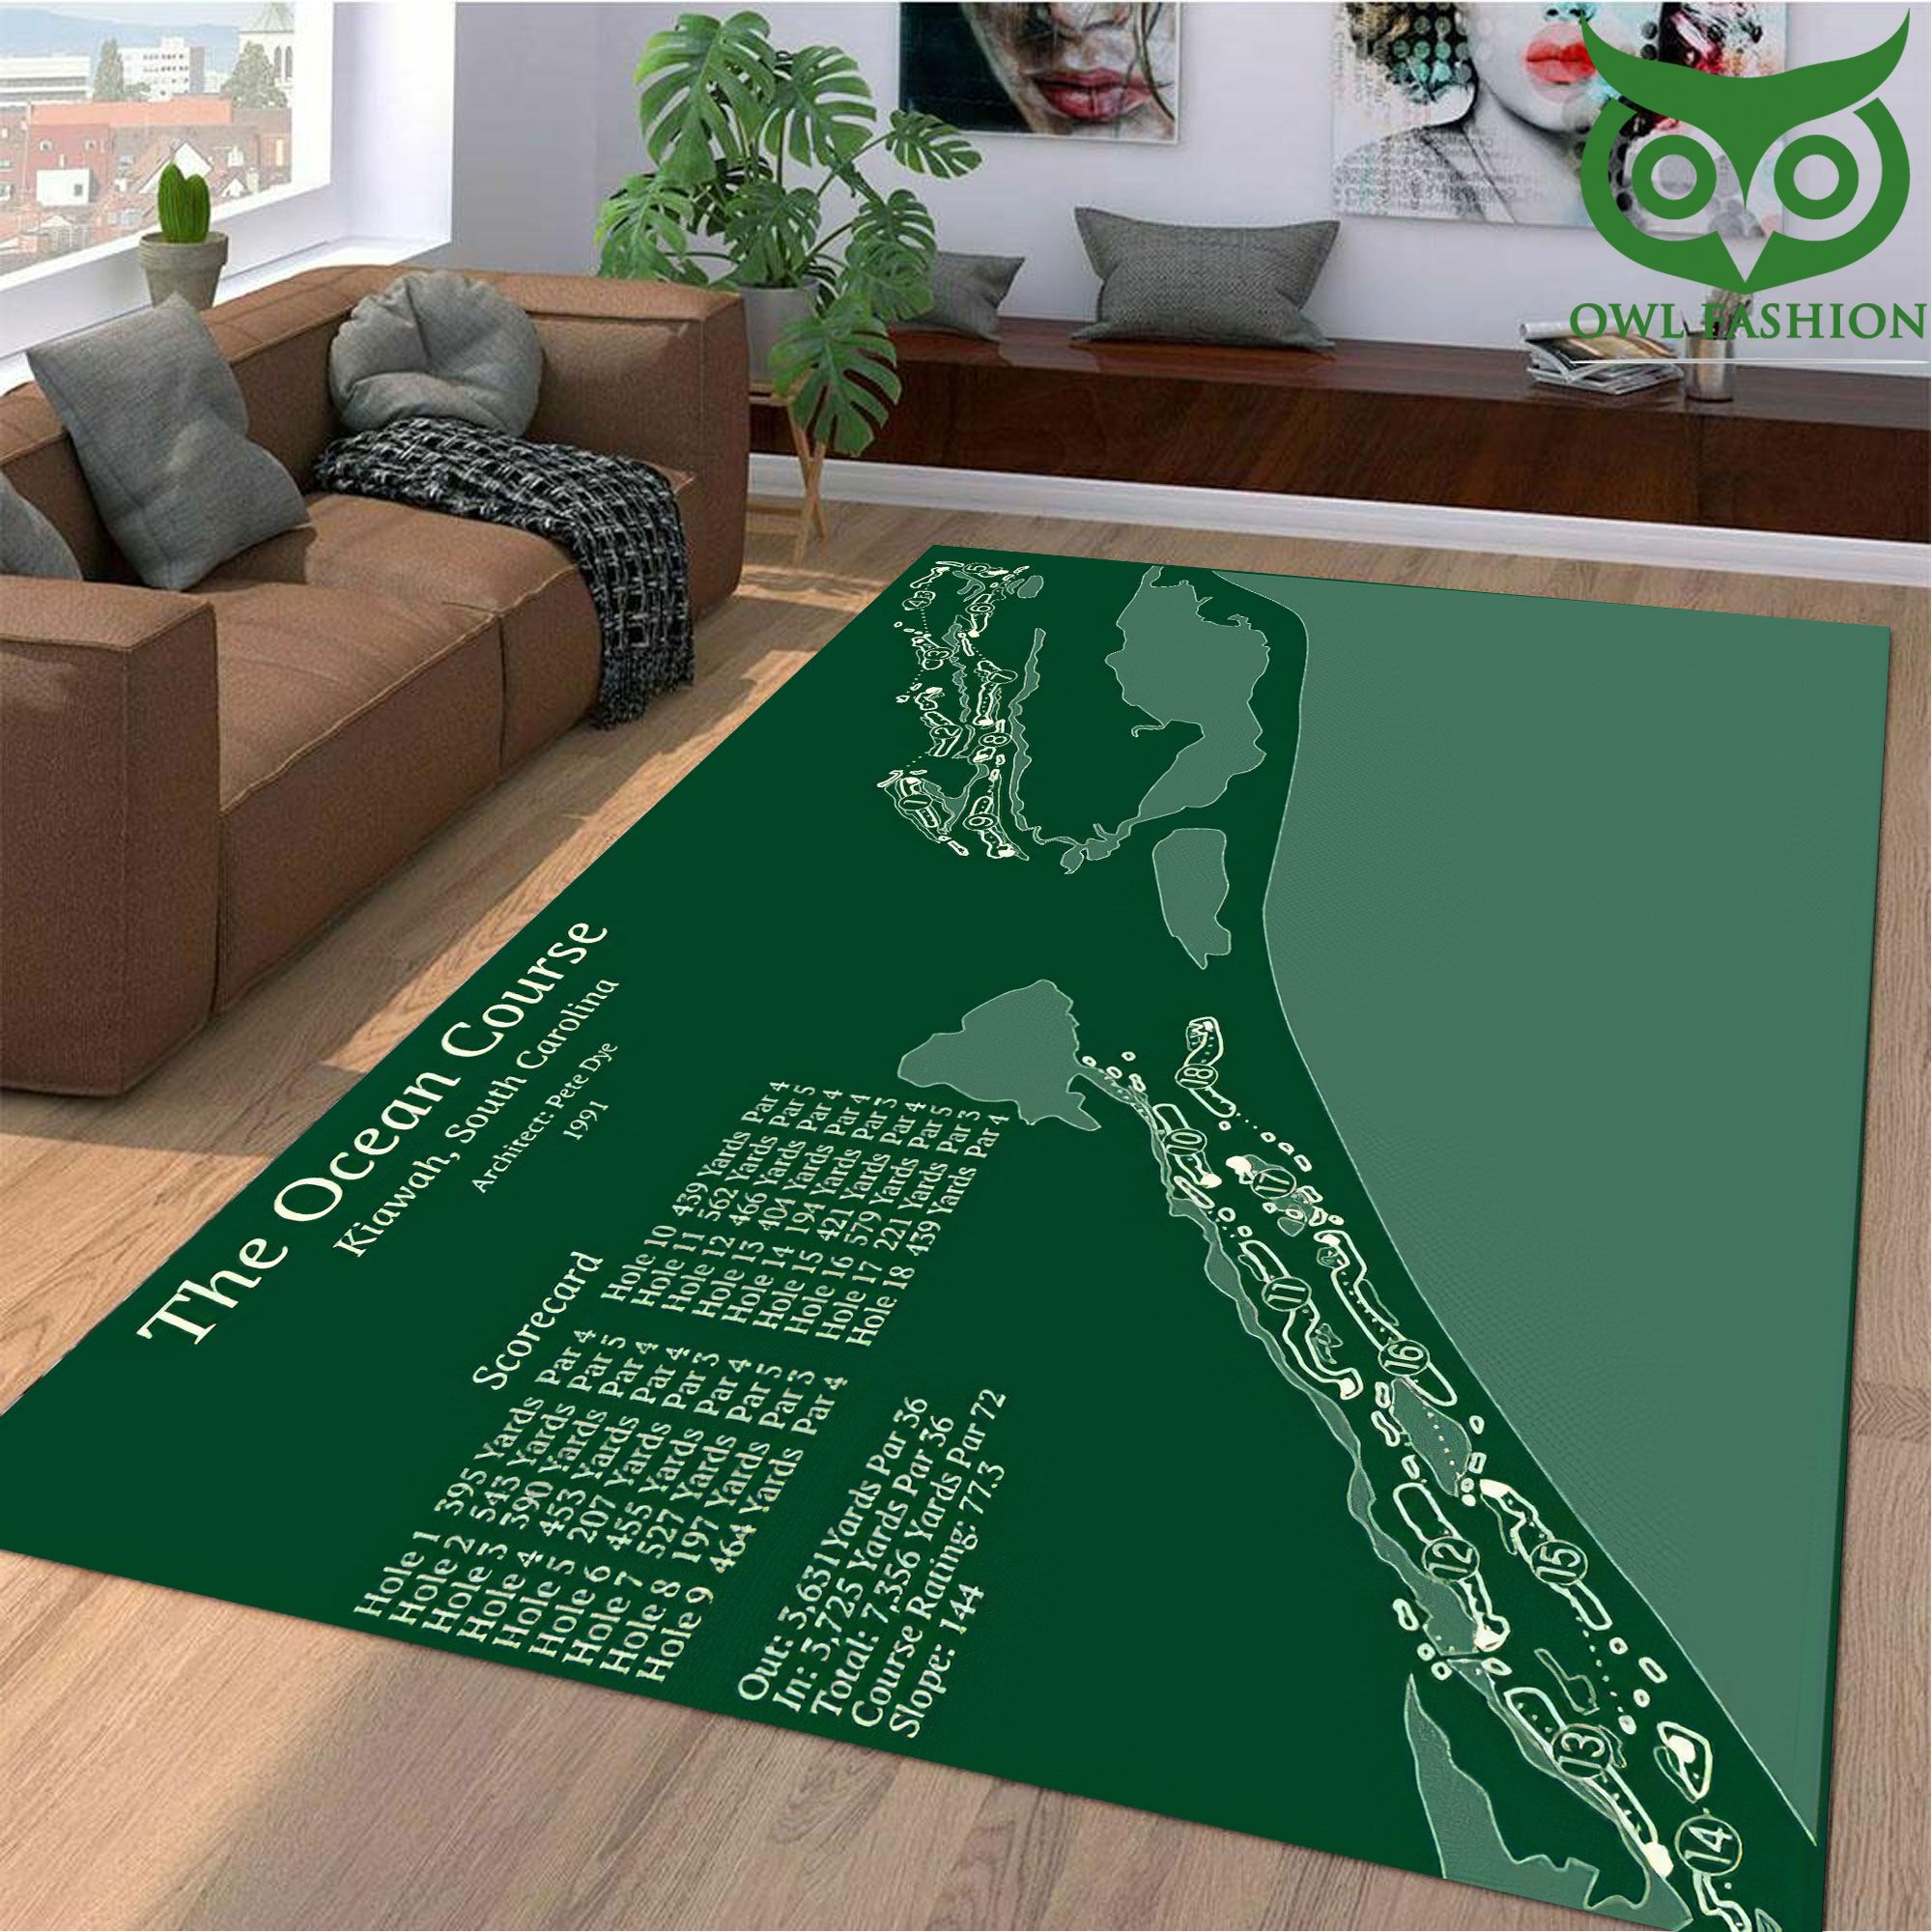 The Ocean Golf Course Limited Edition 3D Carpet Rug